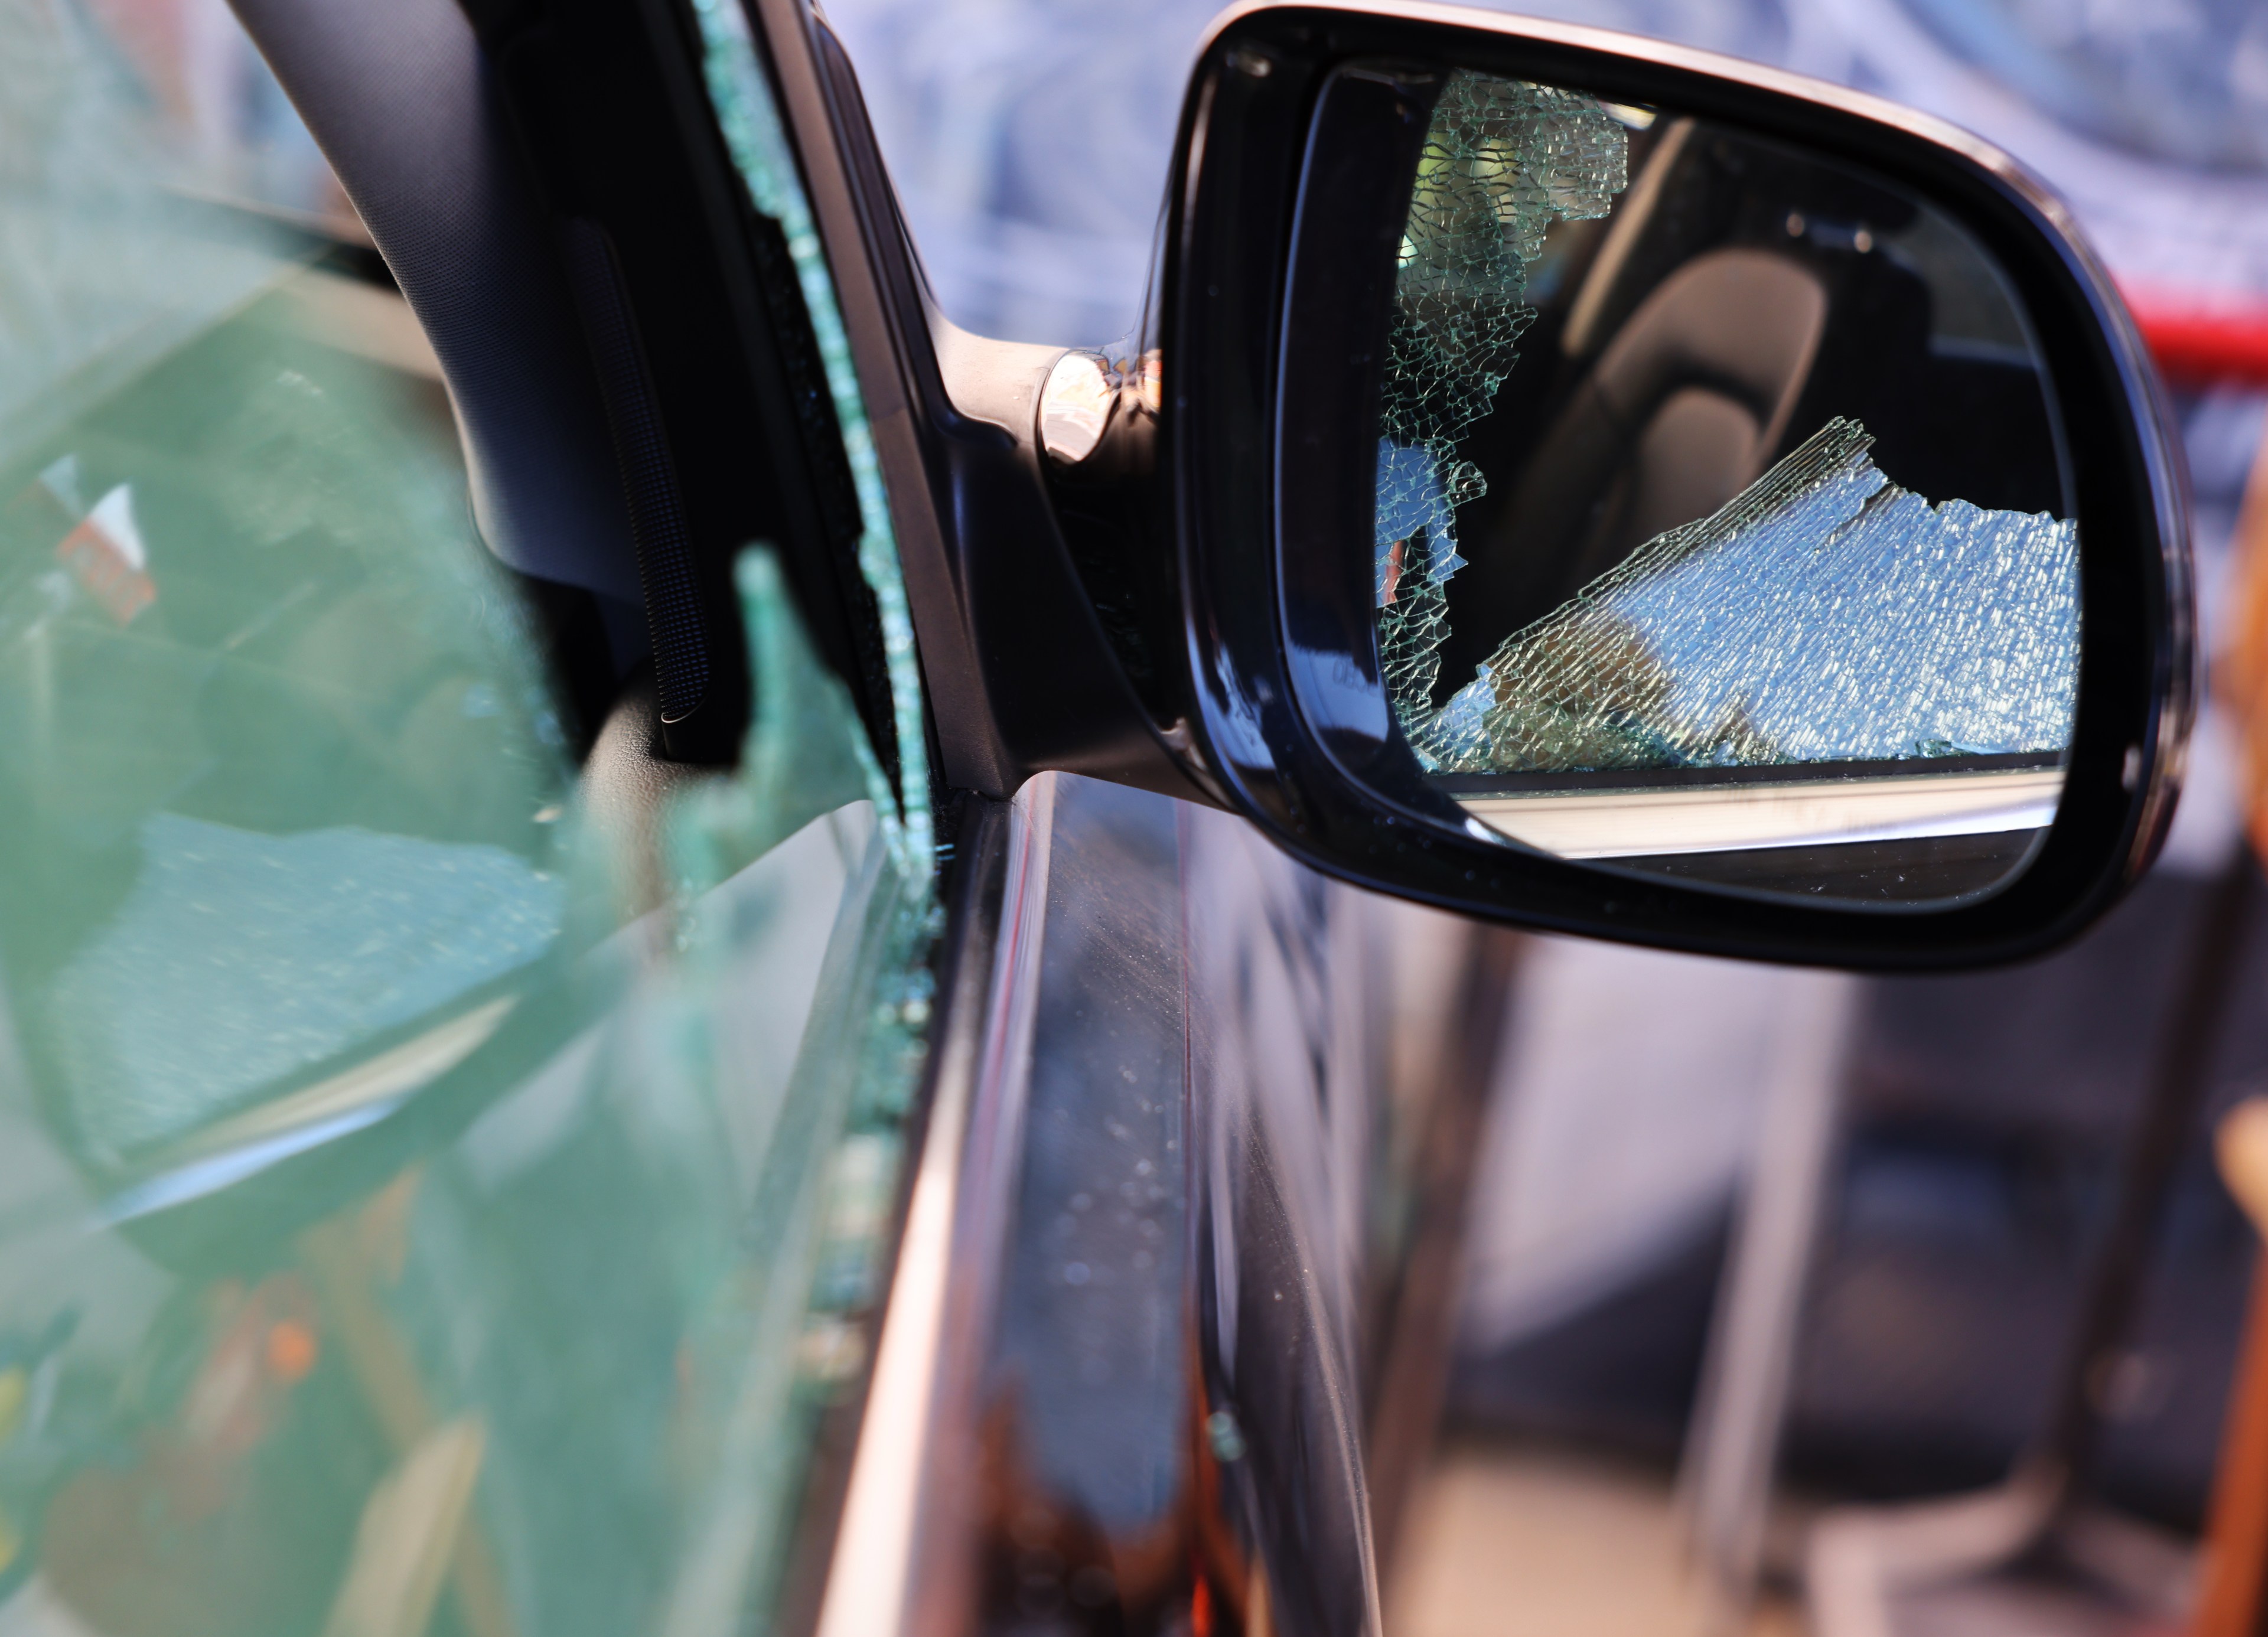 The image shows the exterior side mirror of a car, reflecting shattered glass from a broken window. The broken glass is visible around the mirror and inside the car.